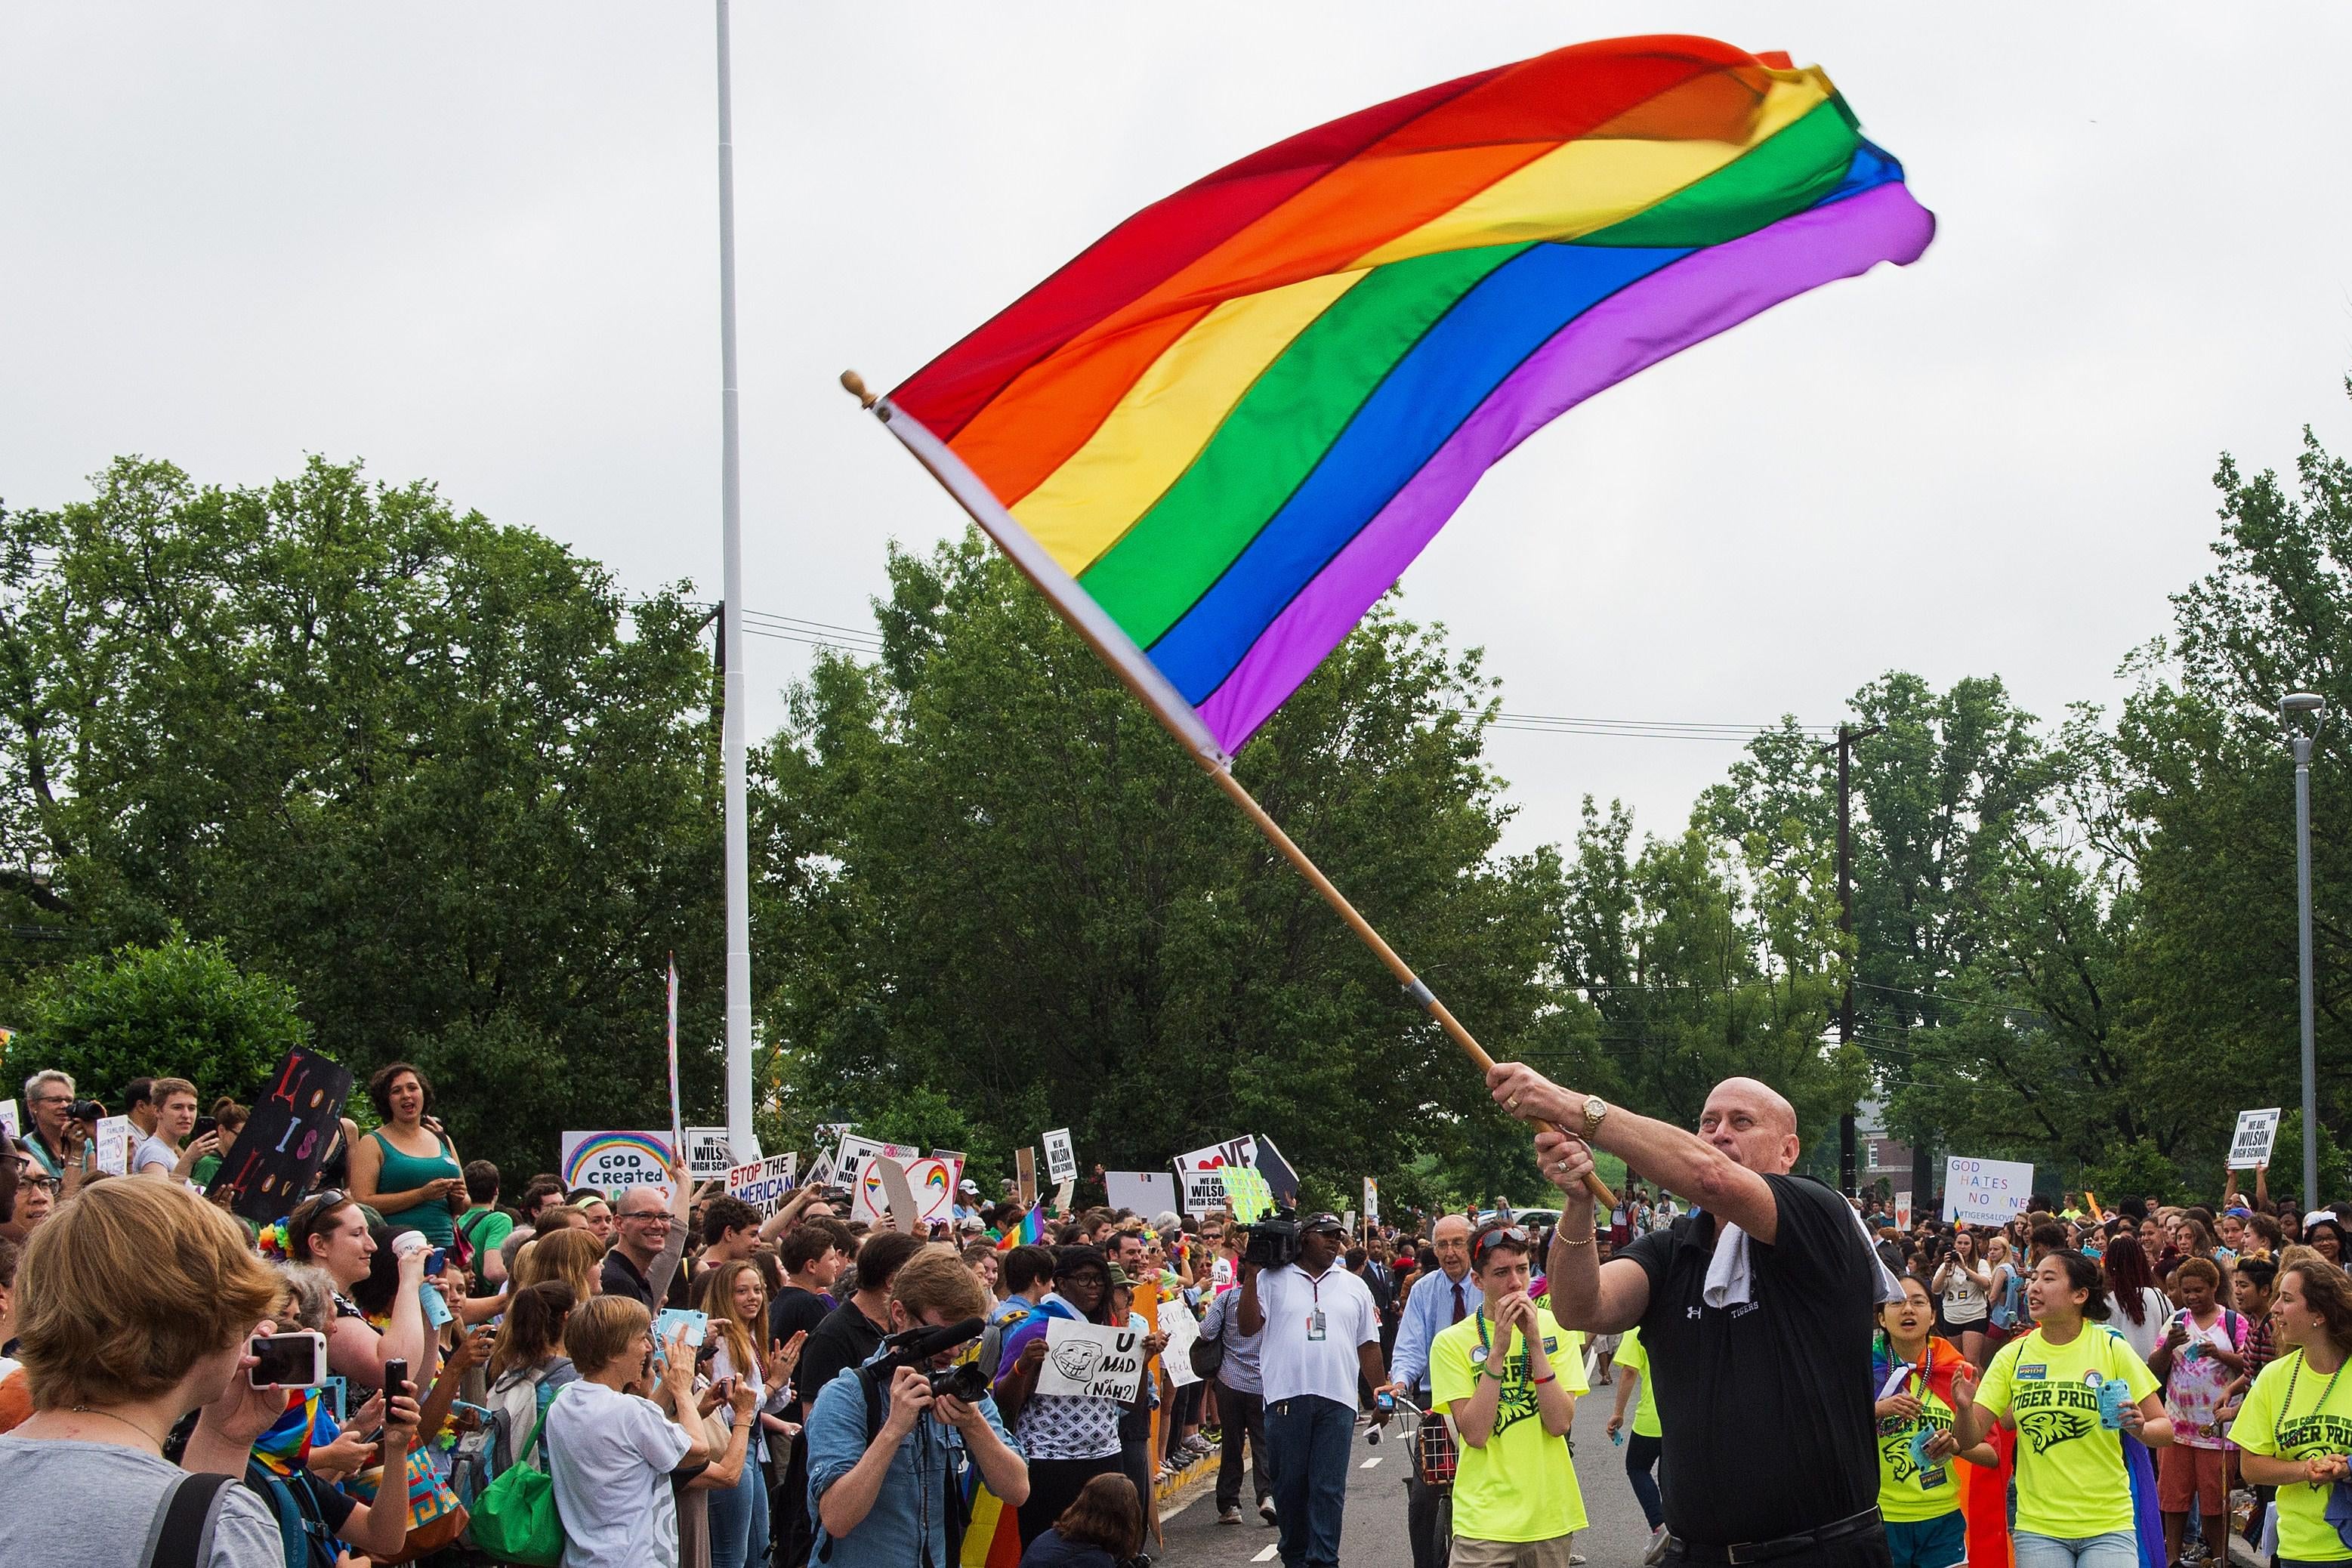 Principal Pete Cahall, waves a rainbow flag, symbolizing gay pride, at a rally of about 1000 Woodrow Wilson High School students and gay supporters June 9, 2014 at Woodrow Wilson High School in Washington, DC. The rally was held to counter a planned protest by  Westboro Baptist Church, the Kansas-based organization known for anti-gay picketing at funerals.      AFP PHOTO/Paul J. Richards        (Photo credit should read PAUL J. RICHARDS/AFP/Getty Images)